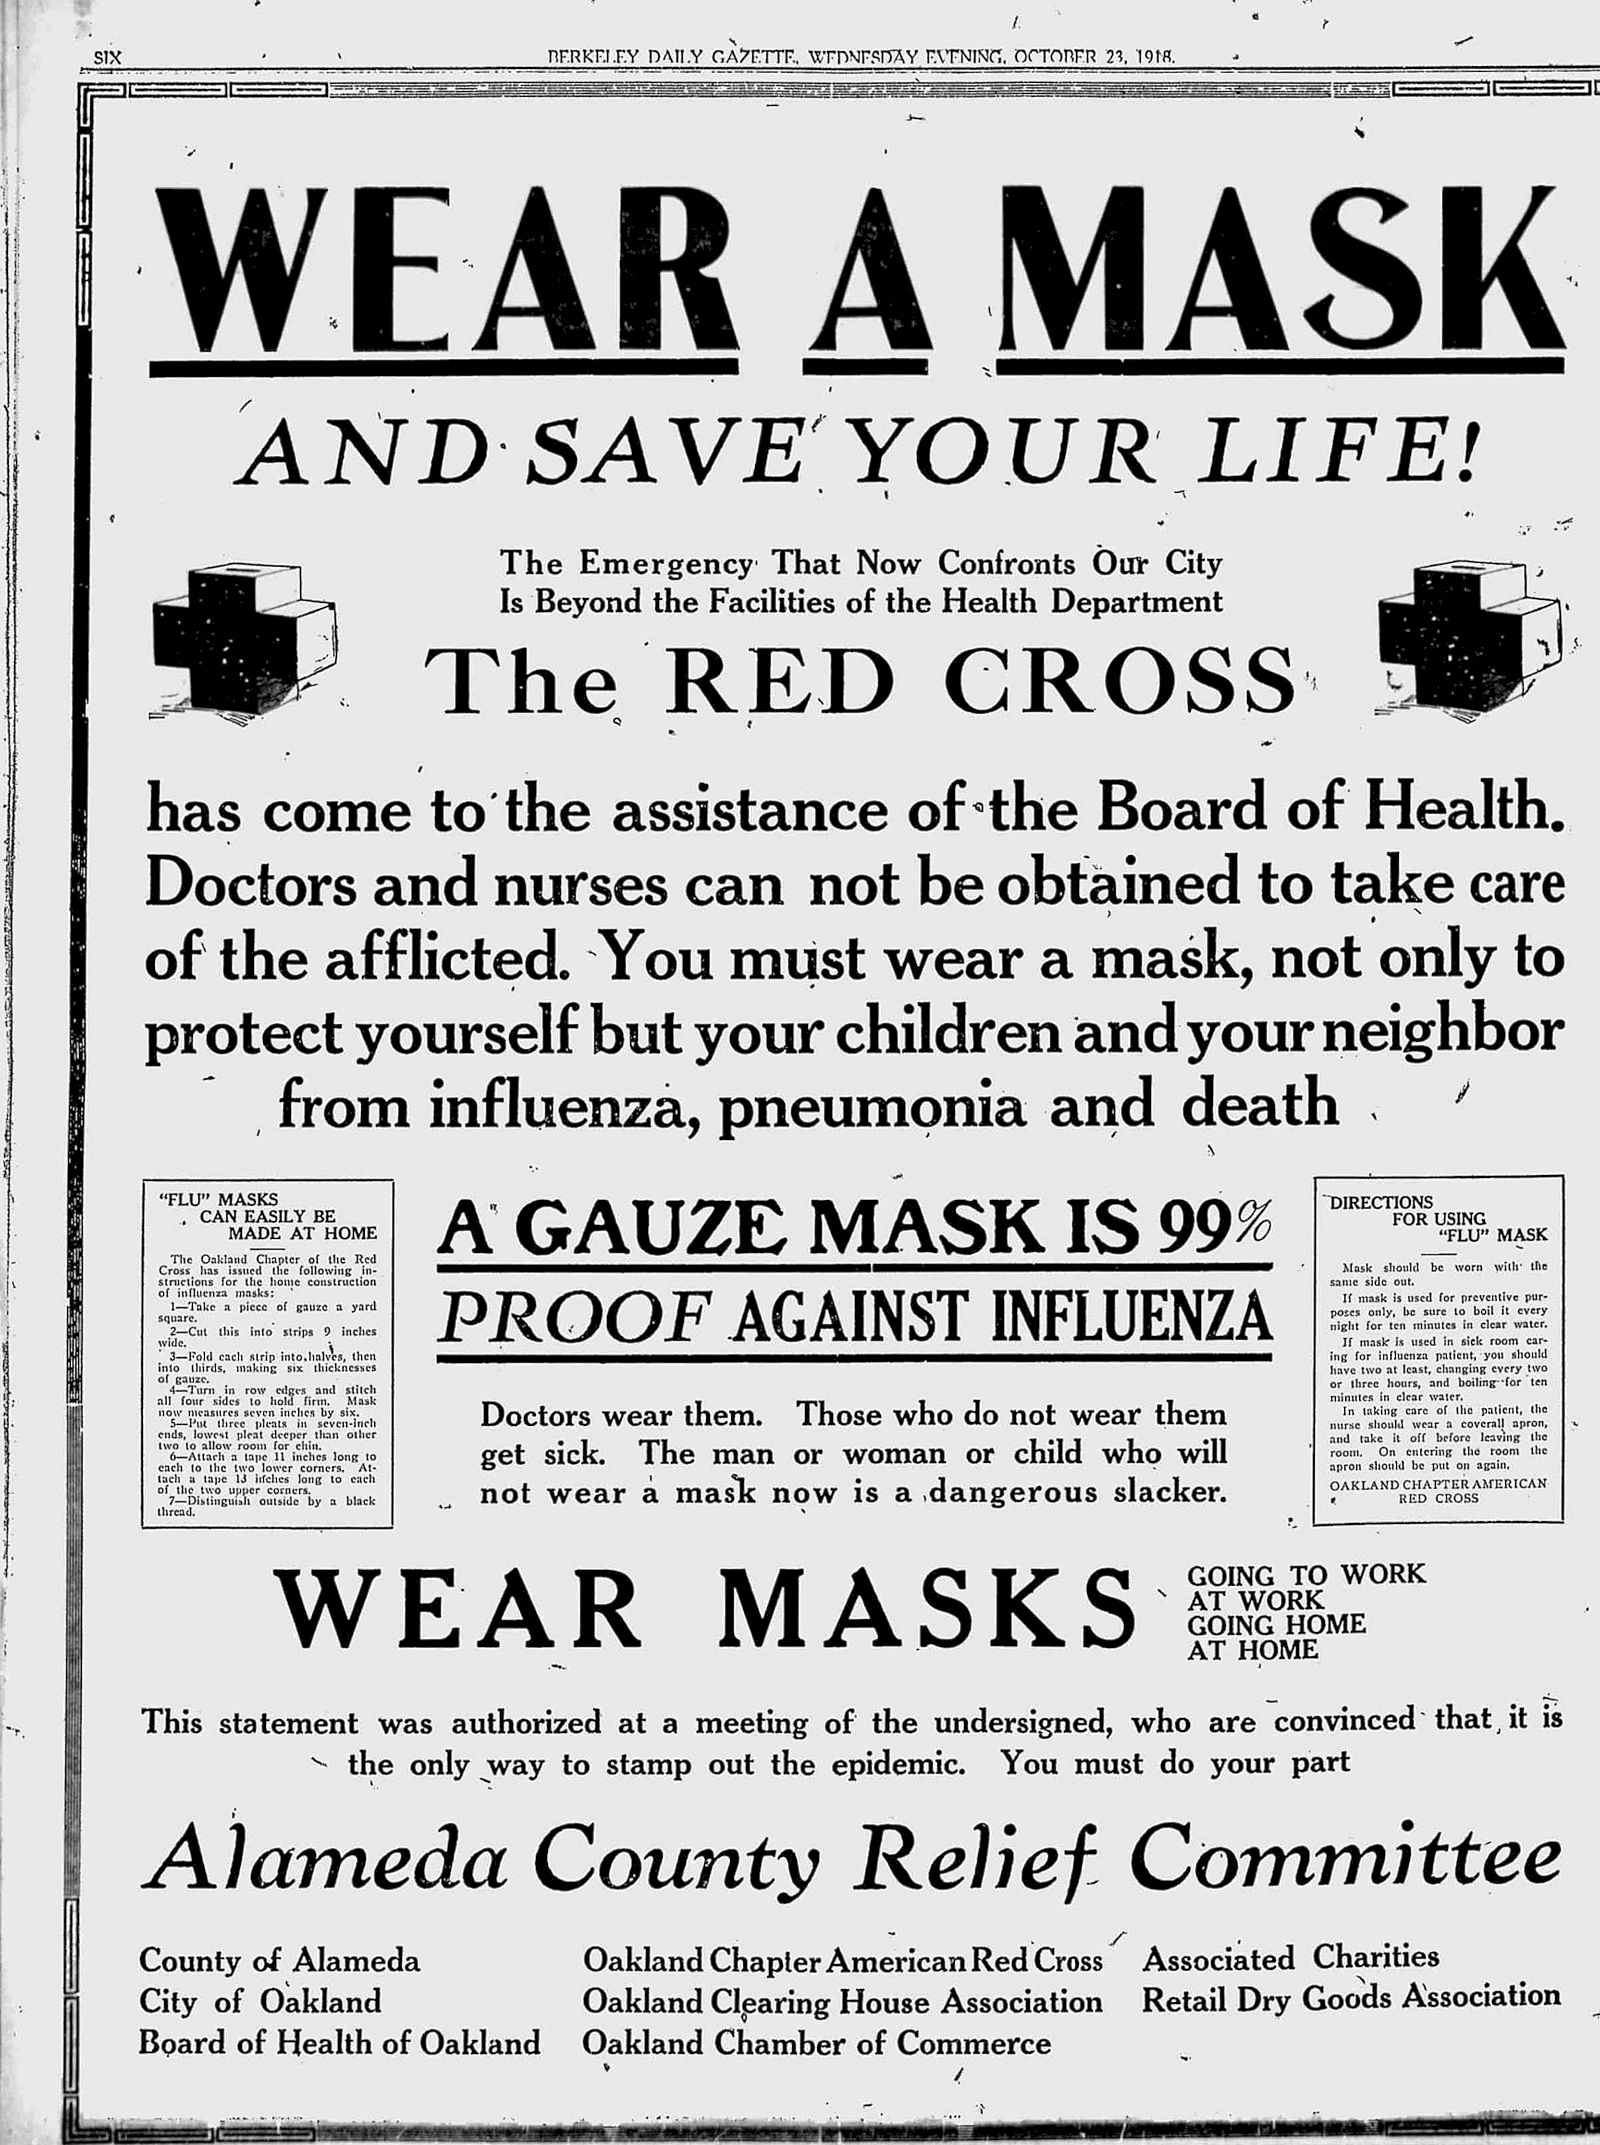 The real reason for the mask requirement in the pandemic